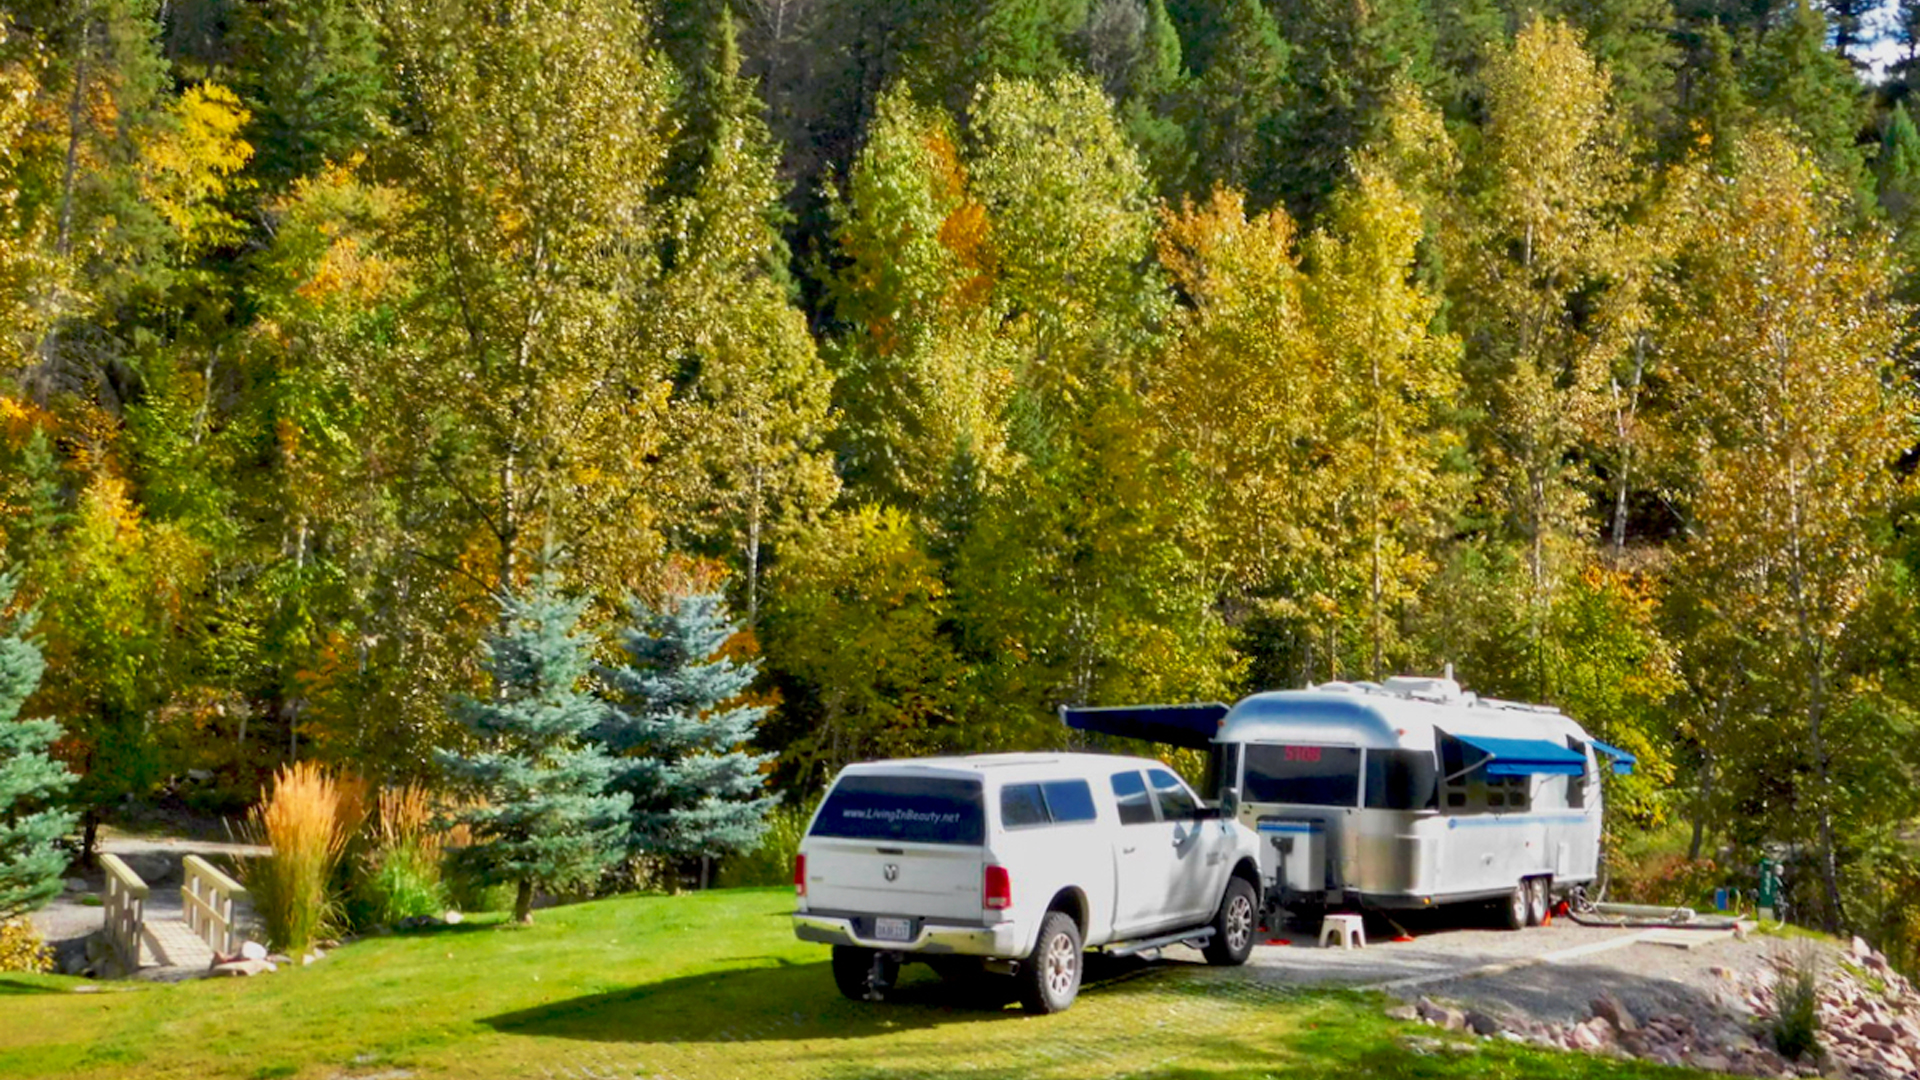 Airstream travel trailer parked in the woods during fall.